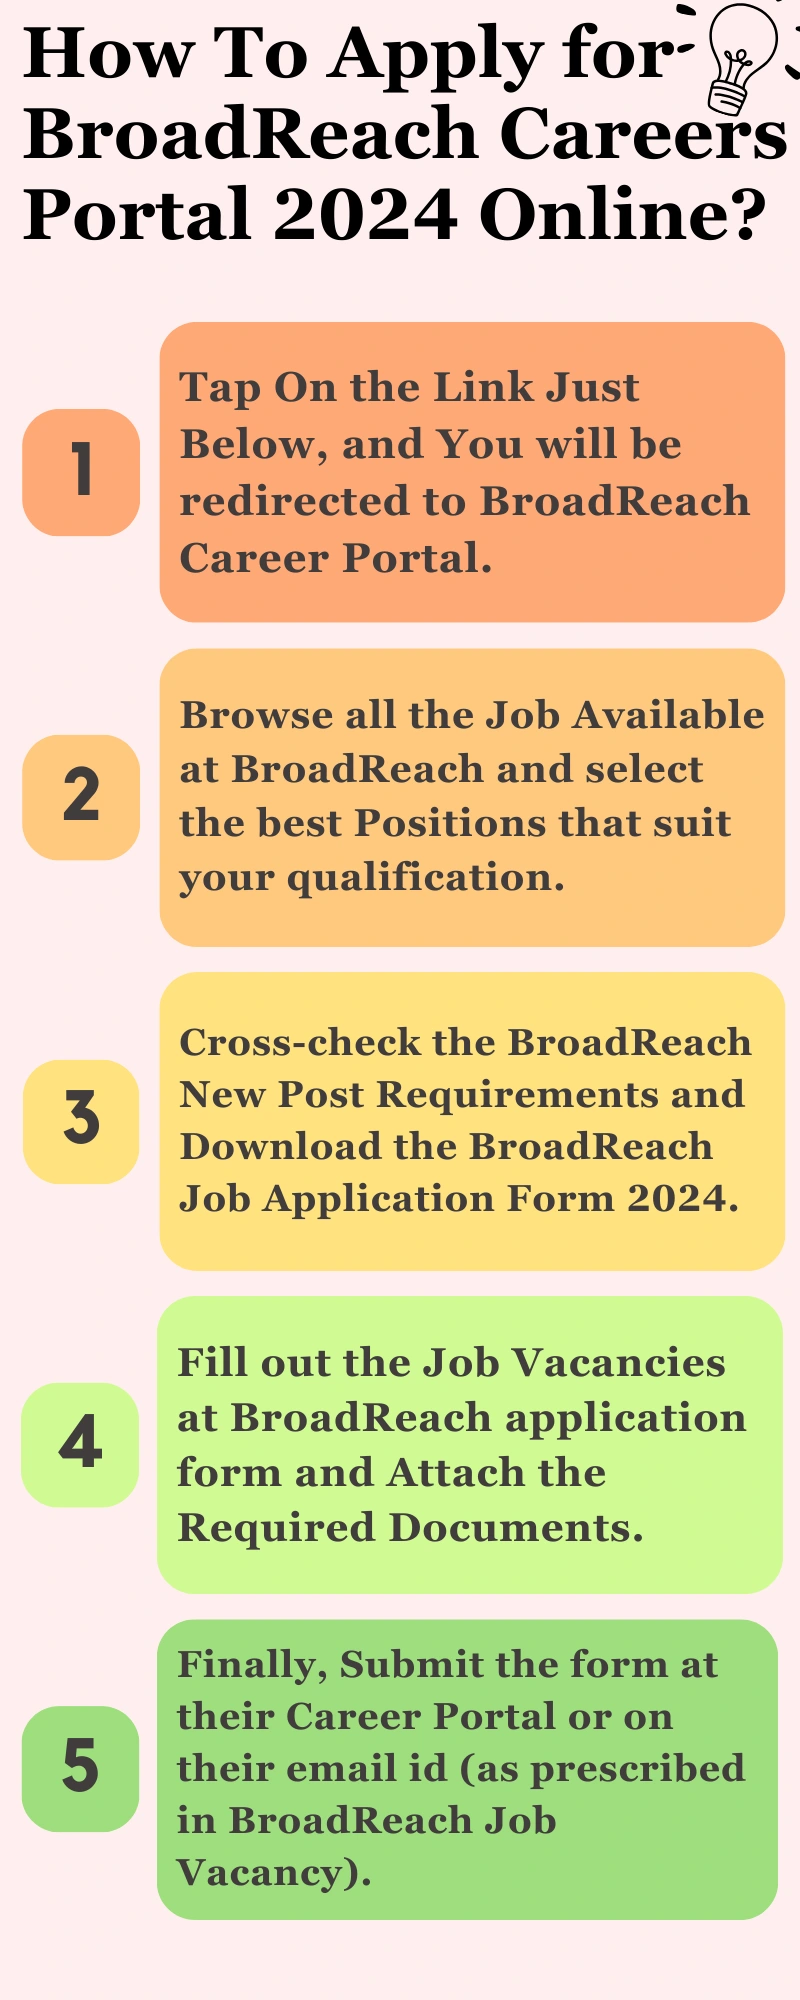 How To Apply for BroadReach Careers Portal 2024 Online?